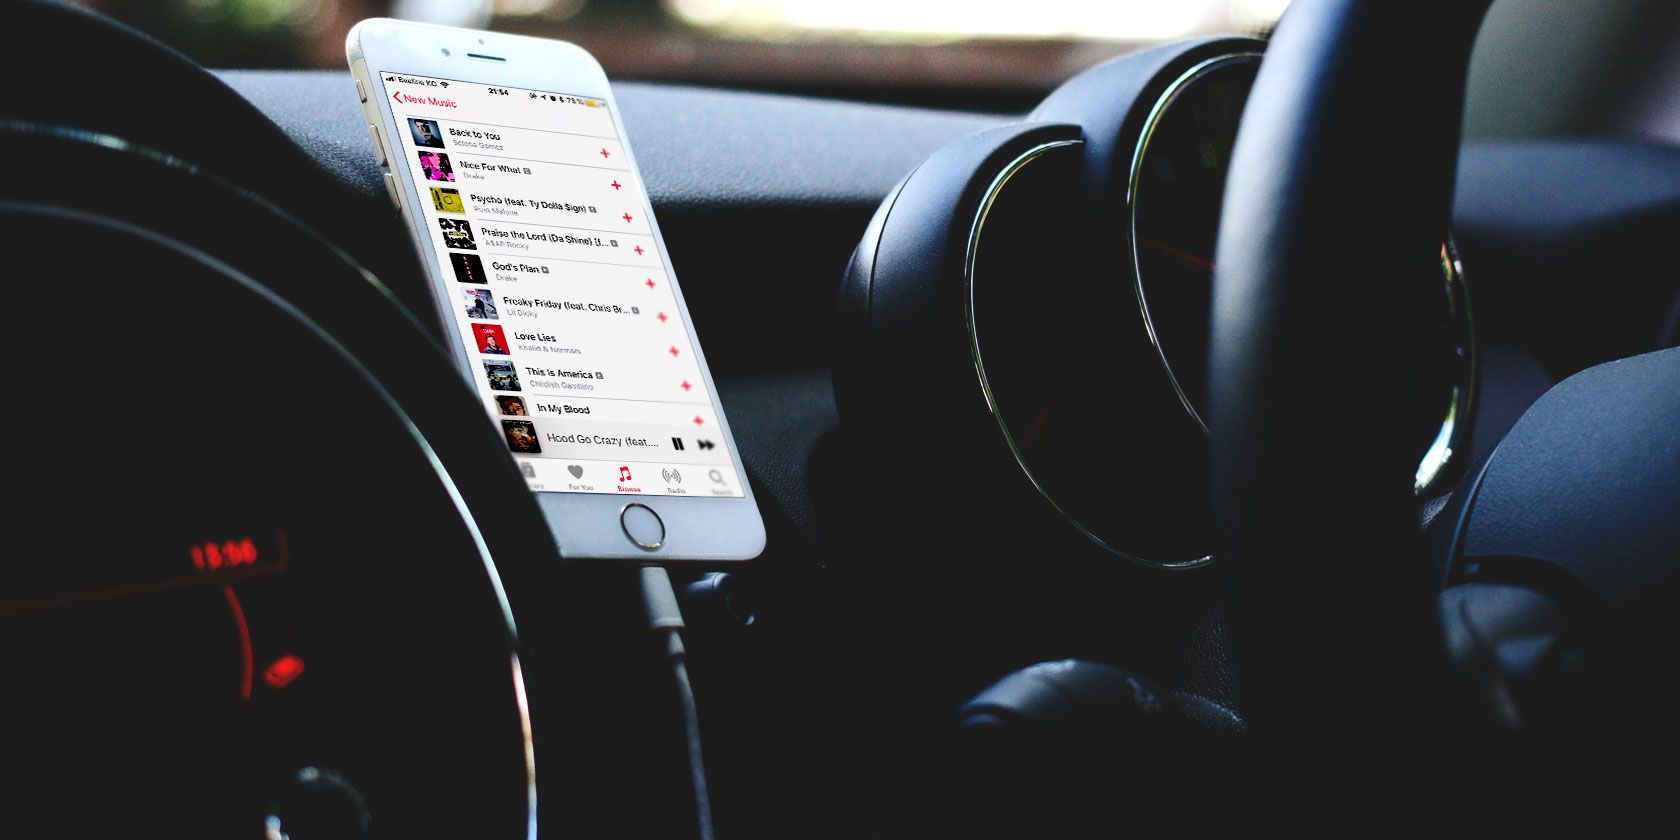 How To Play Music In My Car From My Phone How to Play Music From Your Phone to a Car Stereo